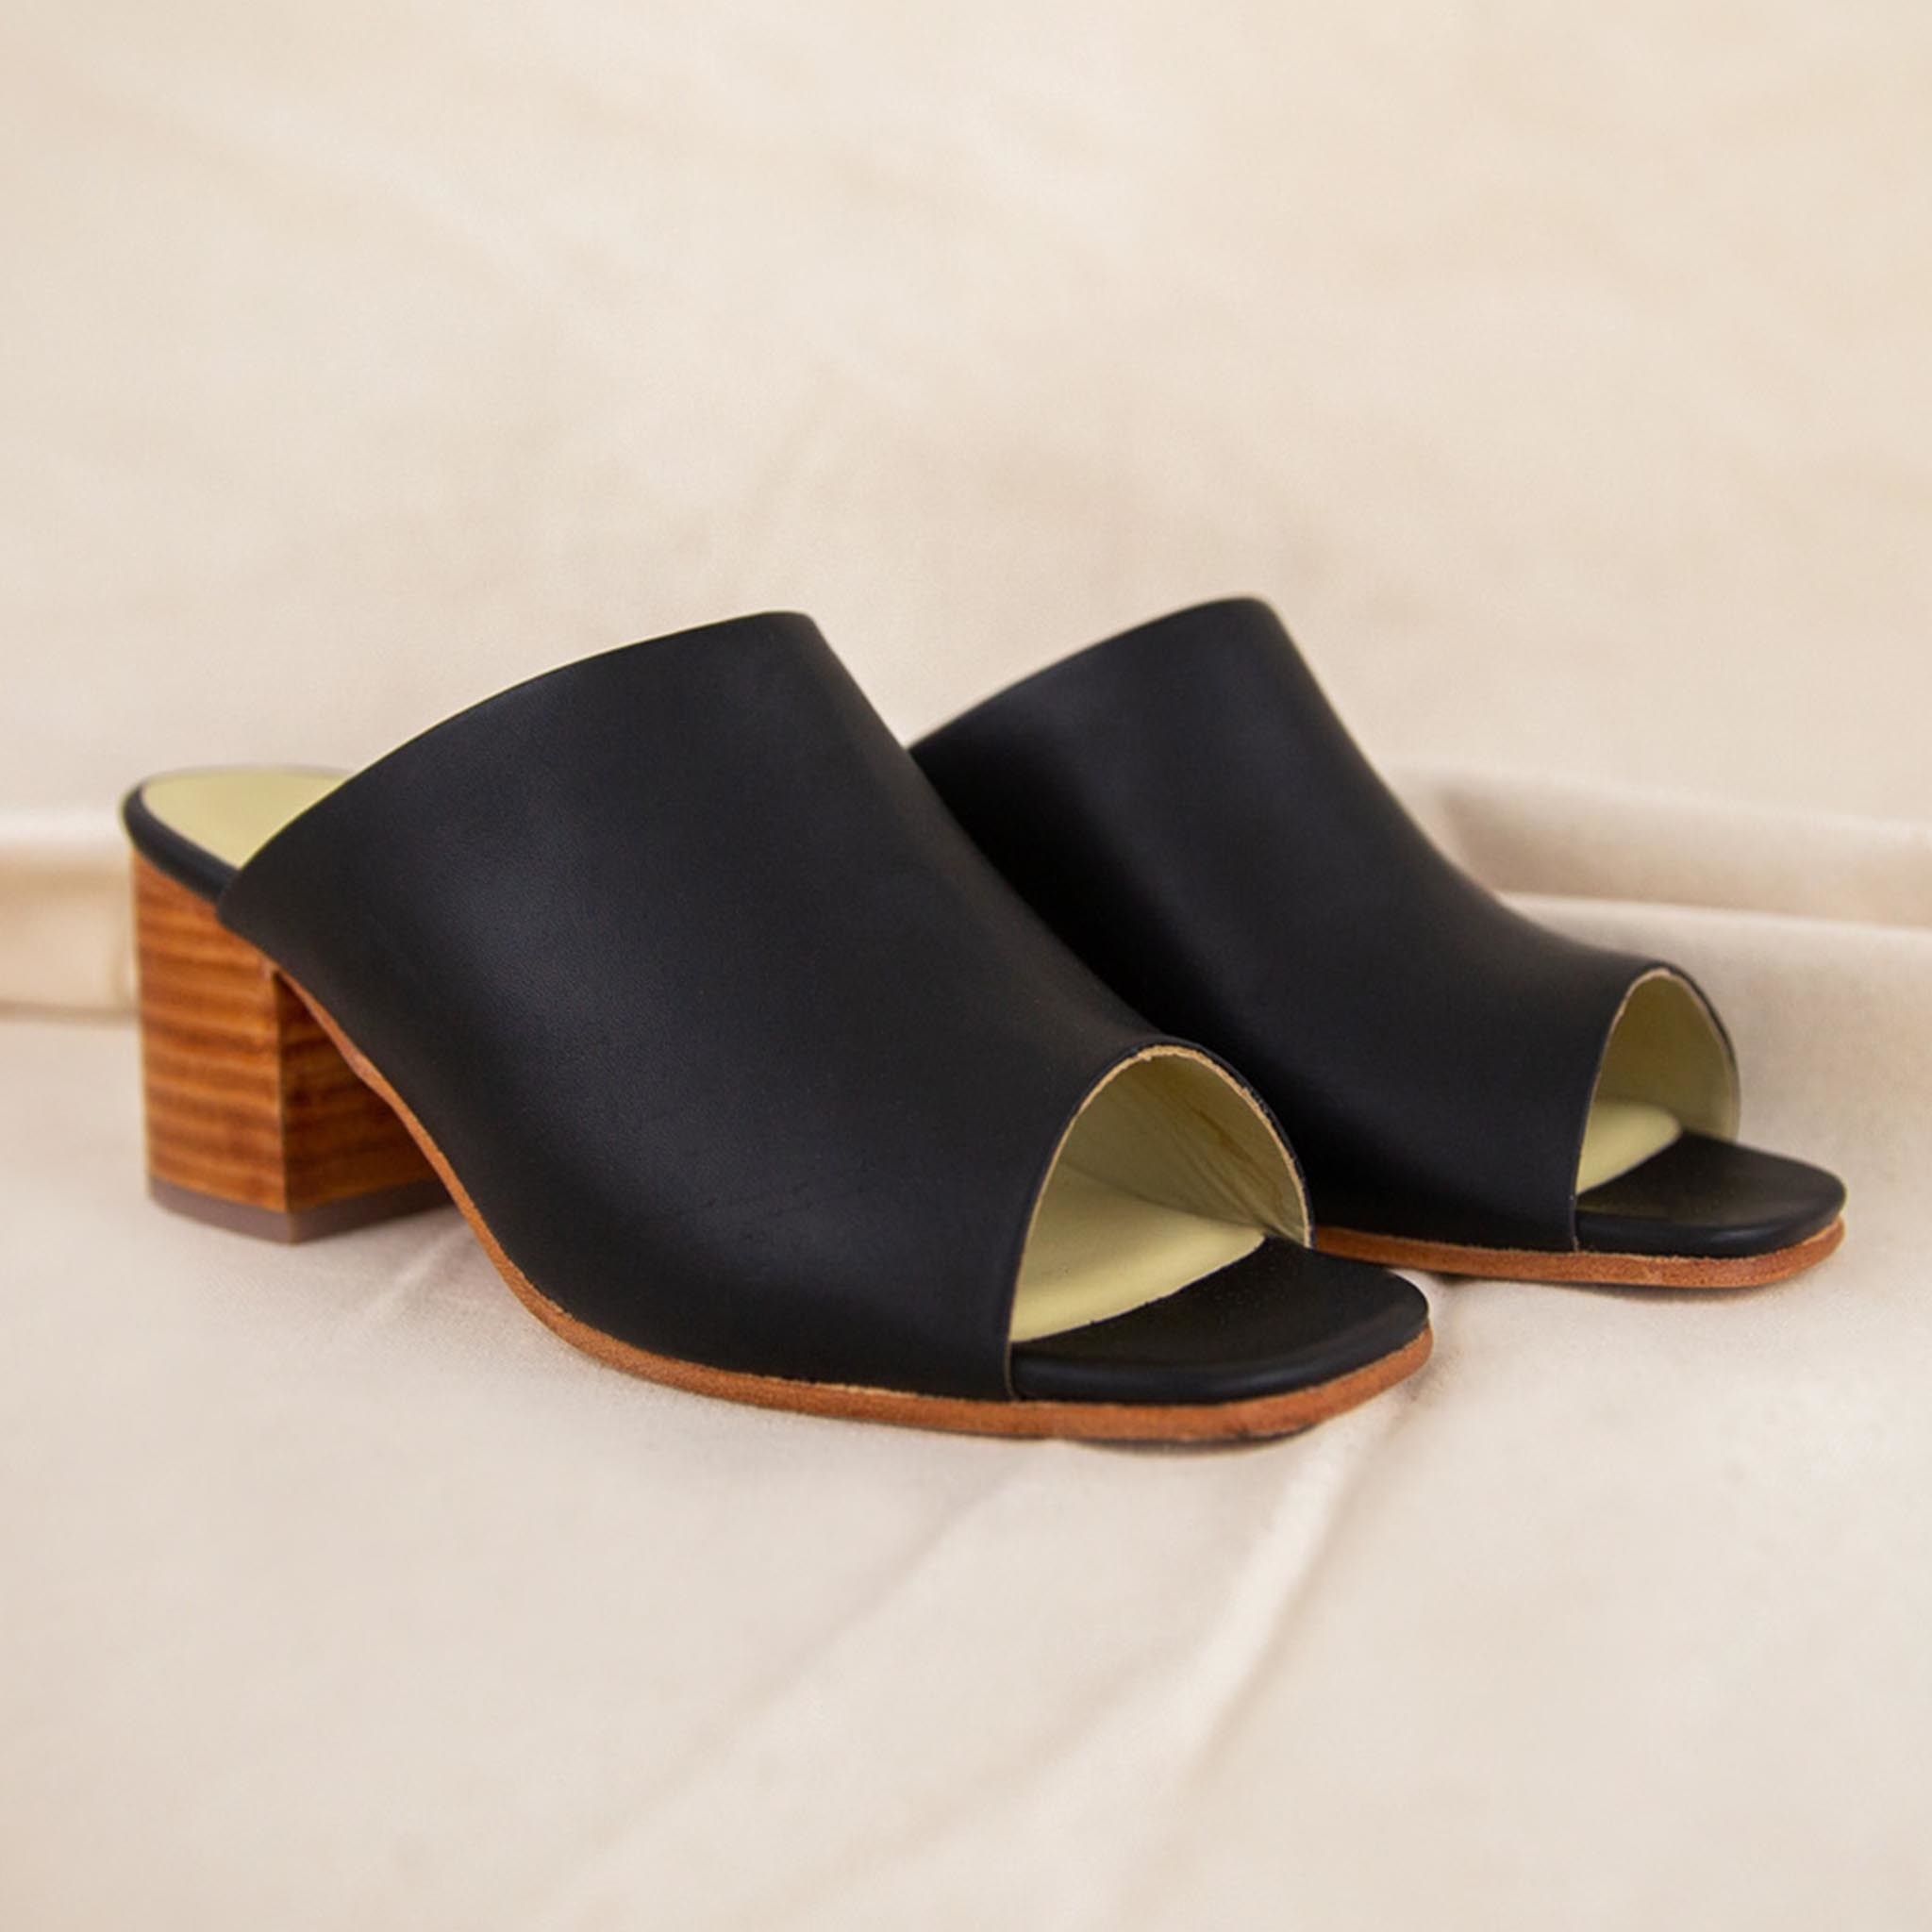 the open toed mules in black with brown heels